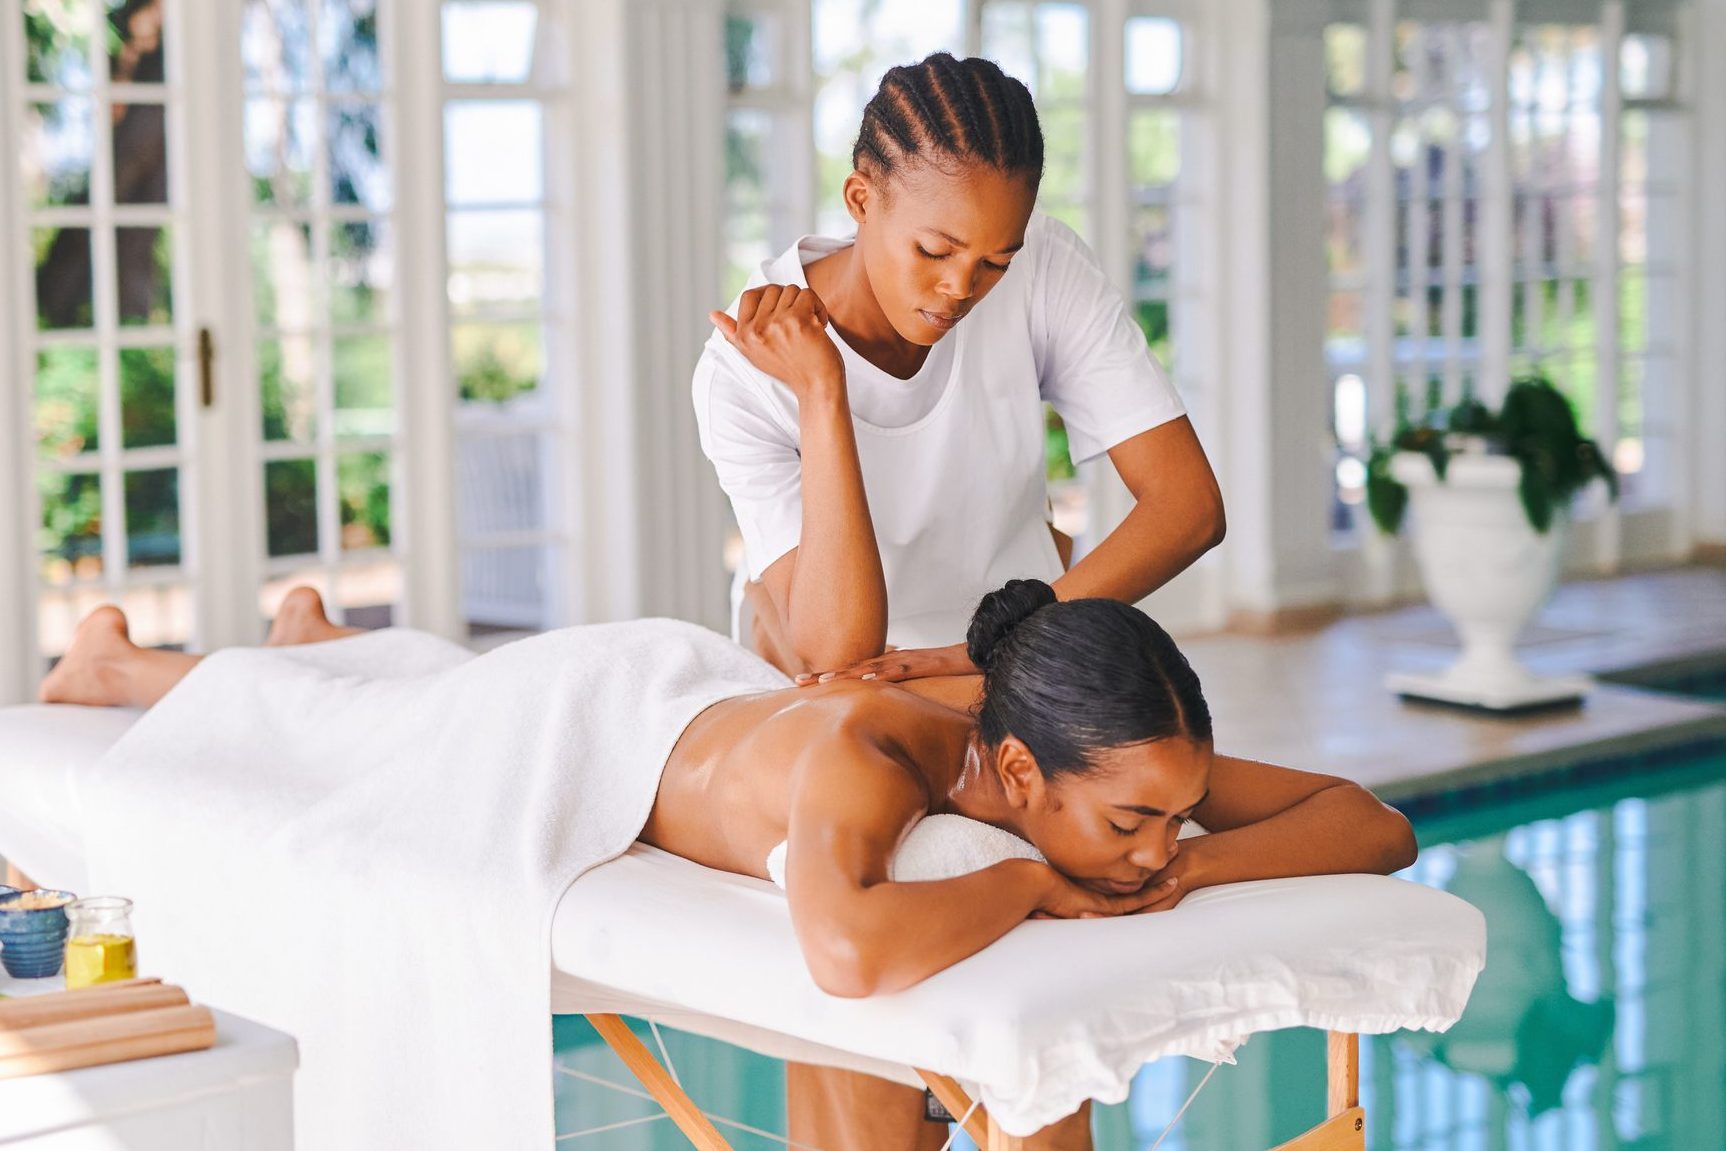 10 Things Your Massage Therapist Notices About You at Your First Visit